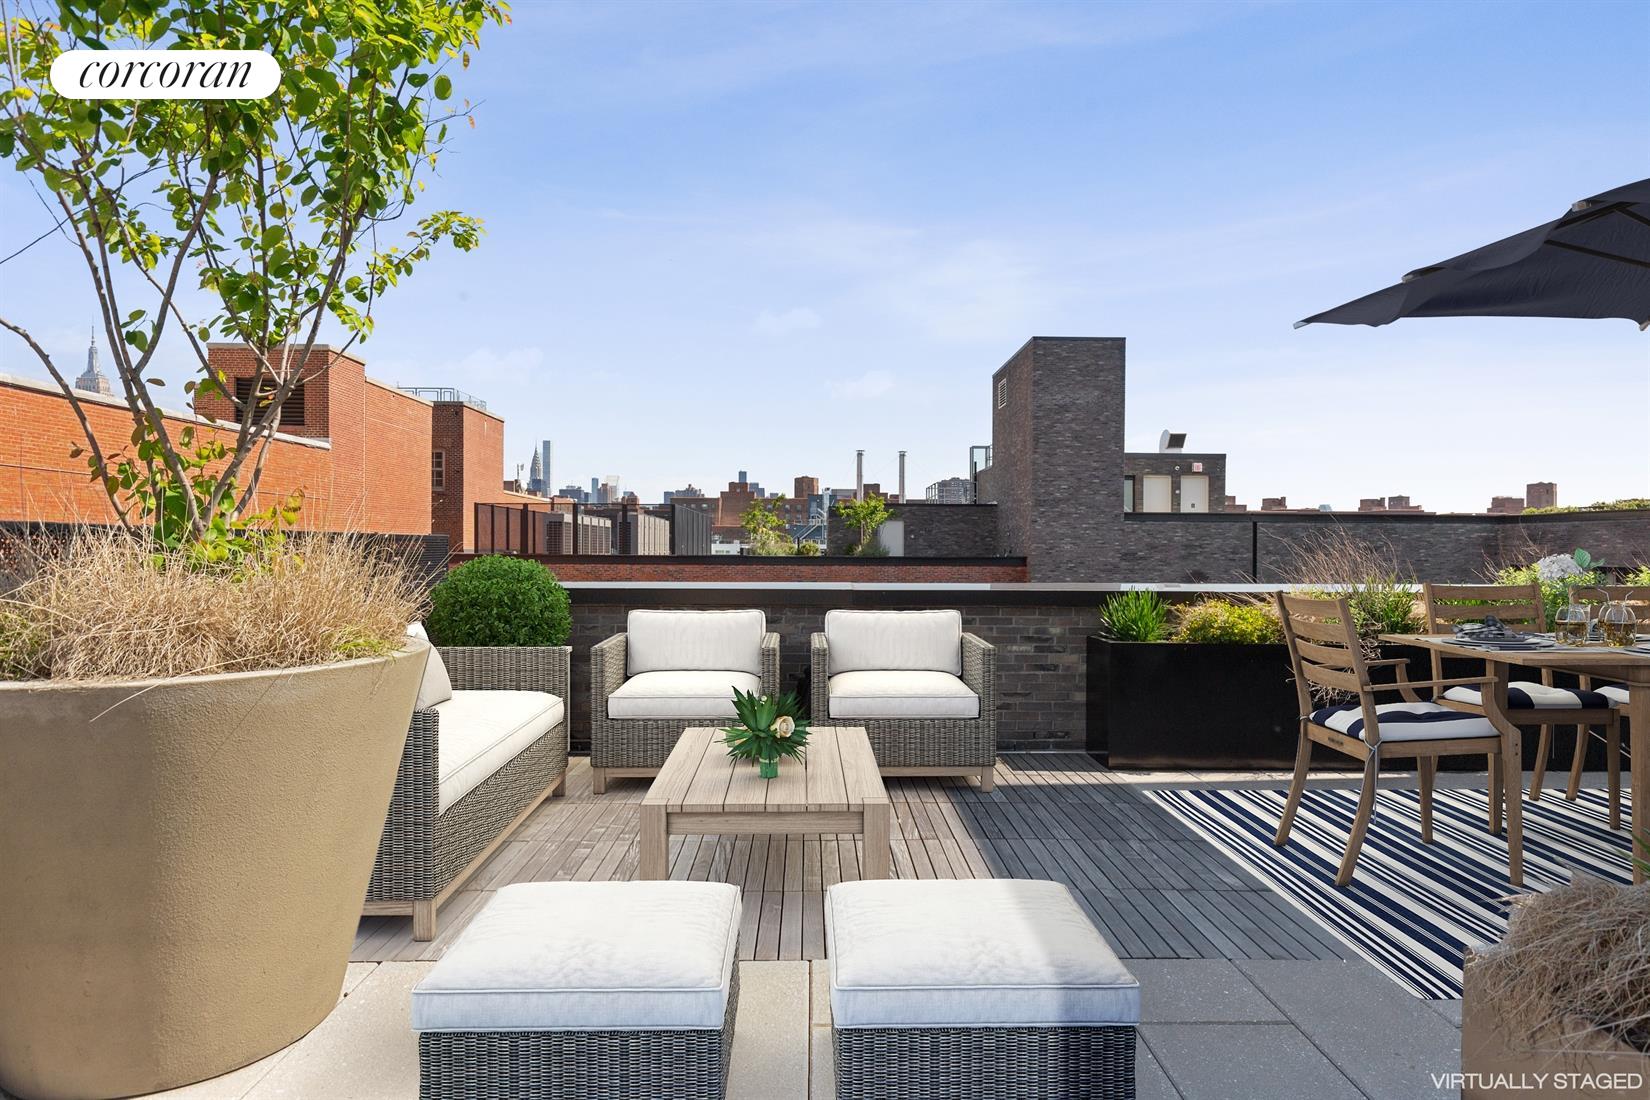 438 East 12th Street Phh, East Village, Downtown, NYC - 3 Bedrooms  
2.5 Bathrooms  
7 Rooms - 